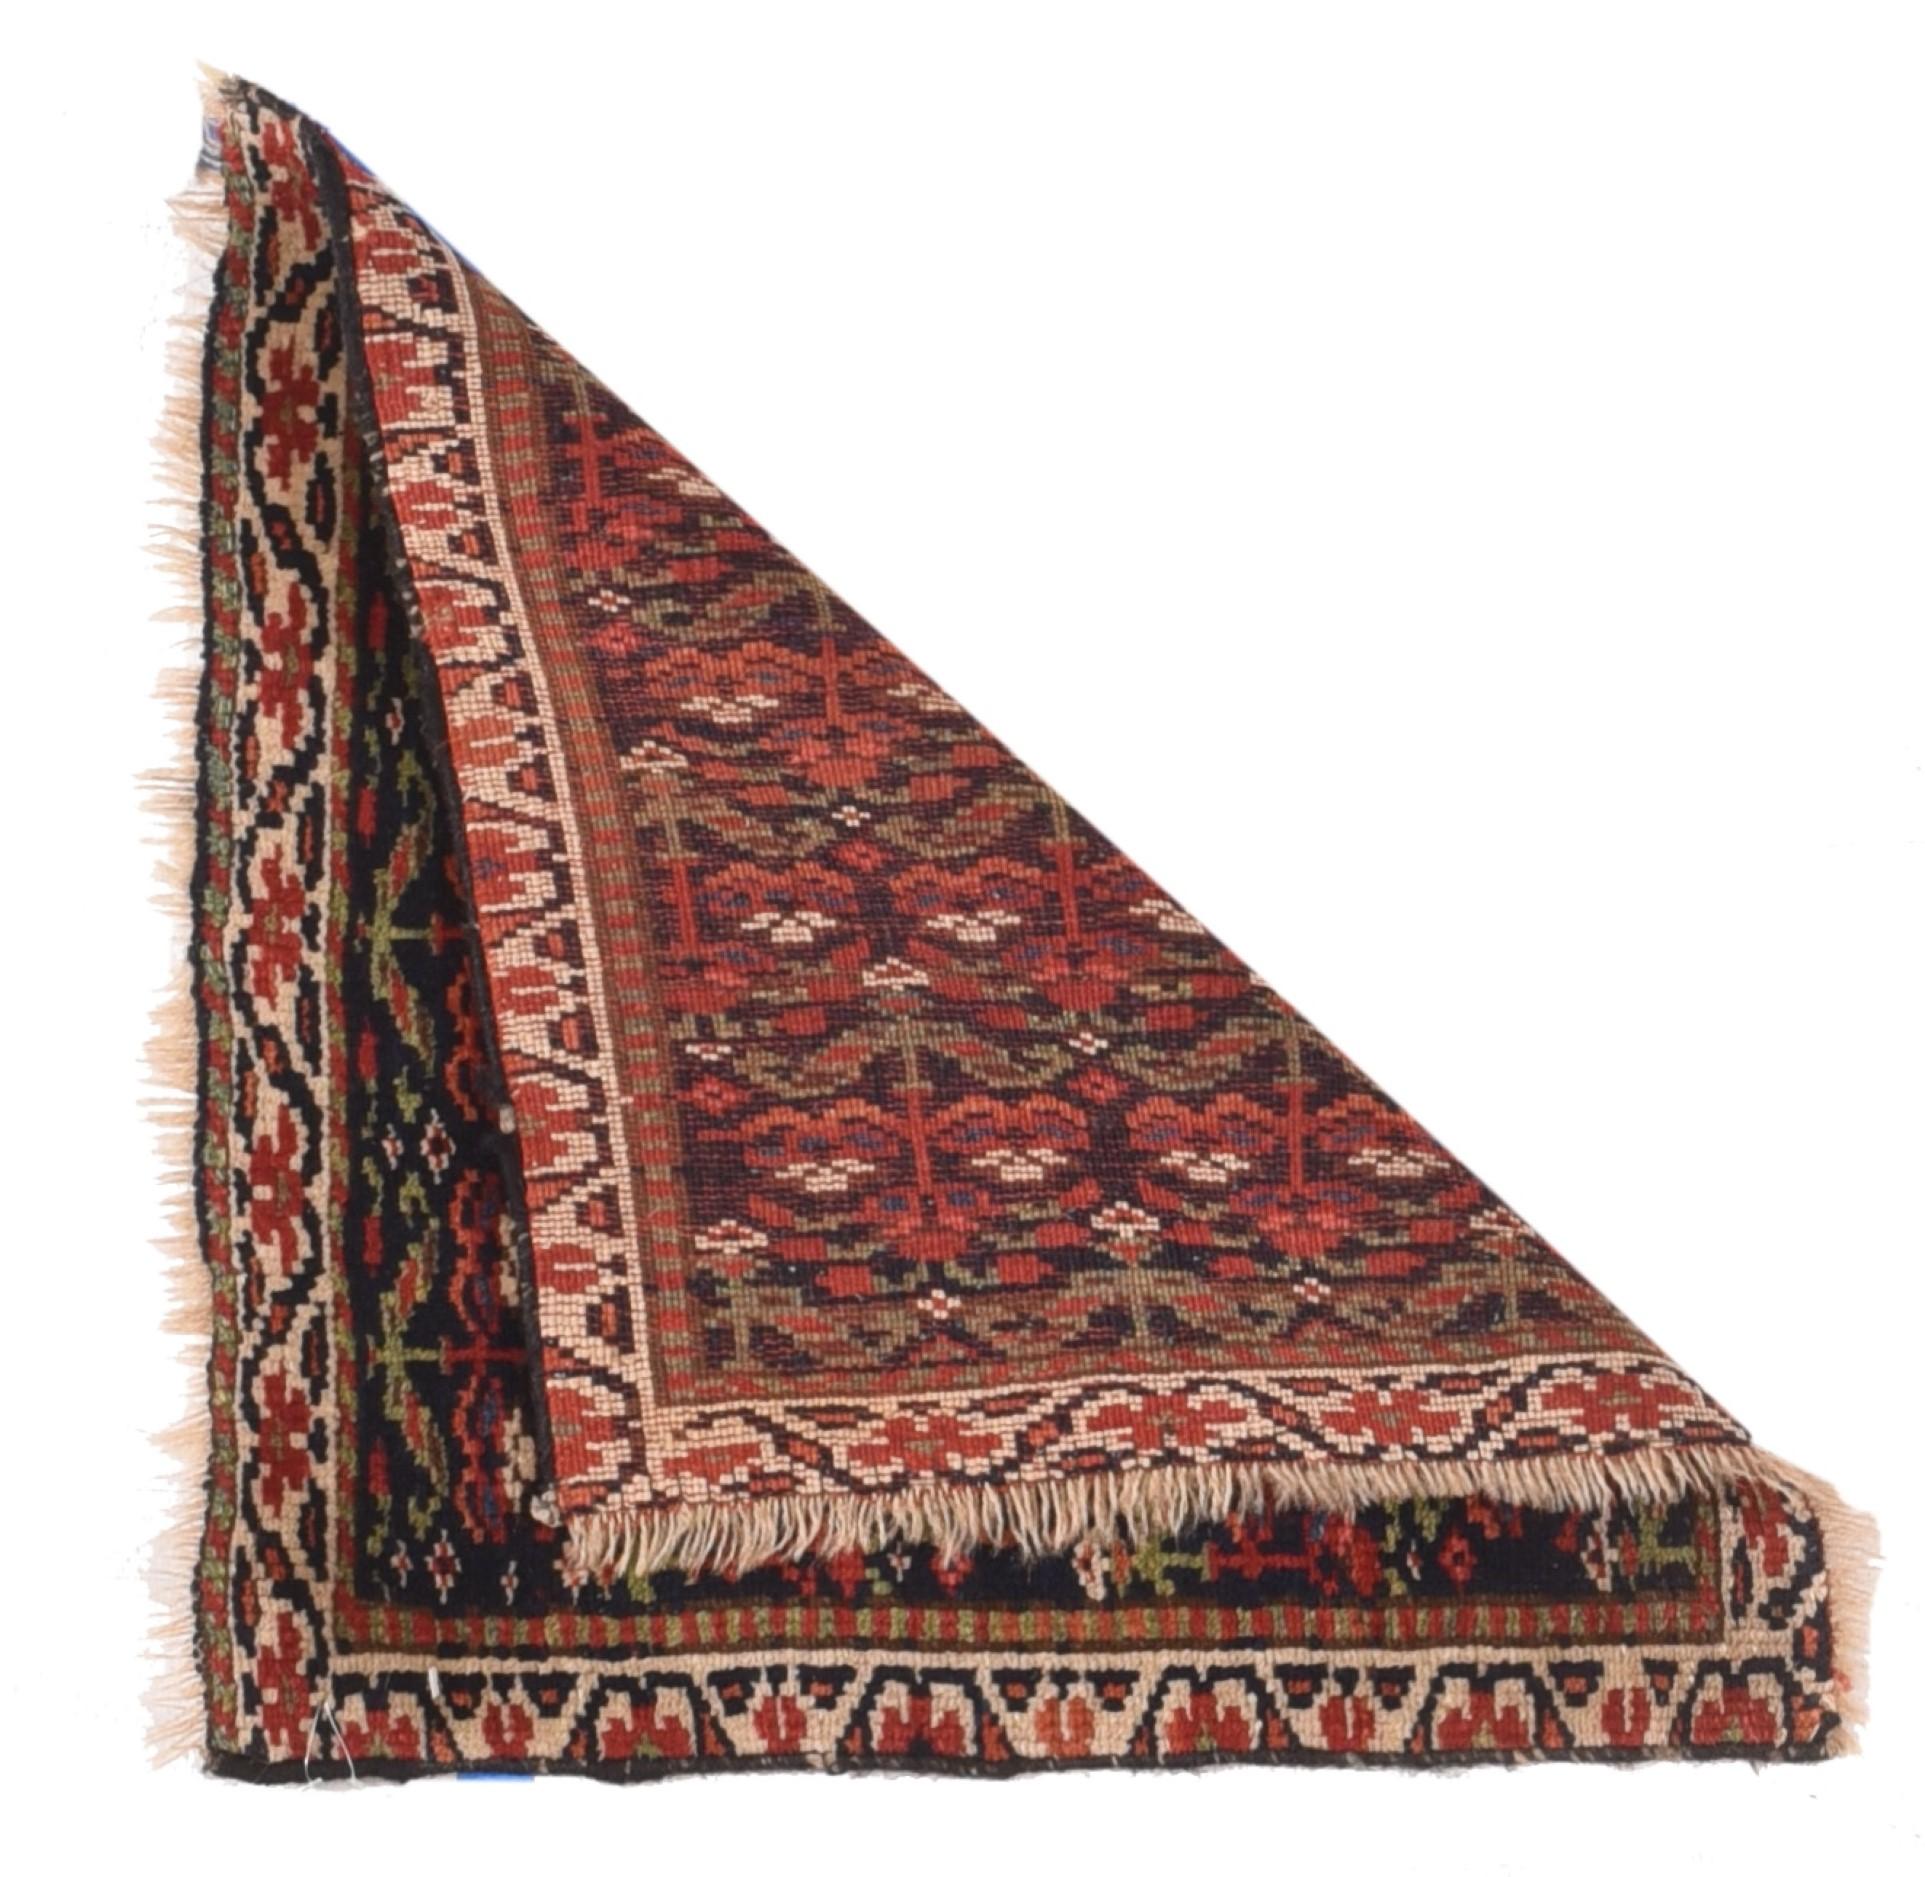 Antique Khamseh Rug 1.8'' x 1.8''. The navy field displays characteristic Kurdish flowers in offset, half-drop rows, all detailed in ecru, green, yellow and red. Ivory border of small, winged ultra-simple palmettes. All sides reduced. Fair